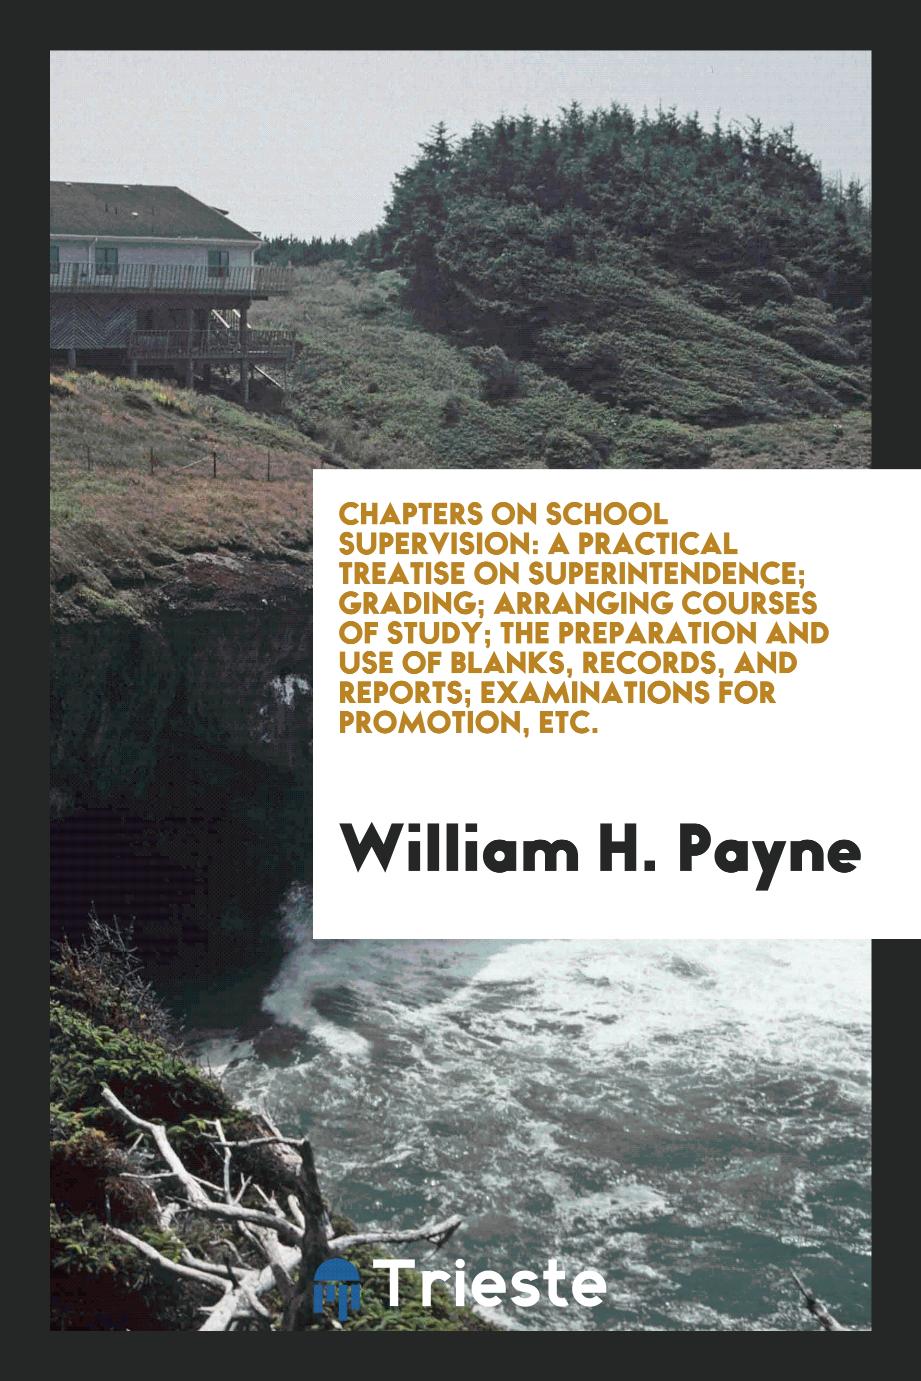 Chapters on School Supervision: A Practical Treatise on Superintendence; Grading; Arranging Courses of Study; The Preparation and Use of Blanks, Records, and Reports; Examinations for Promotion, Etc.